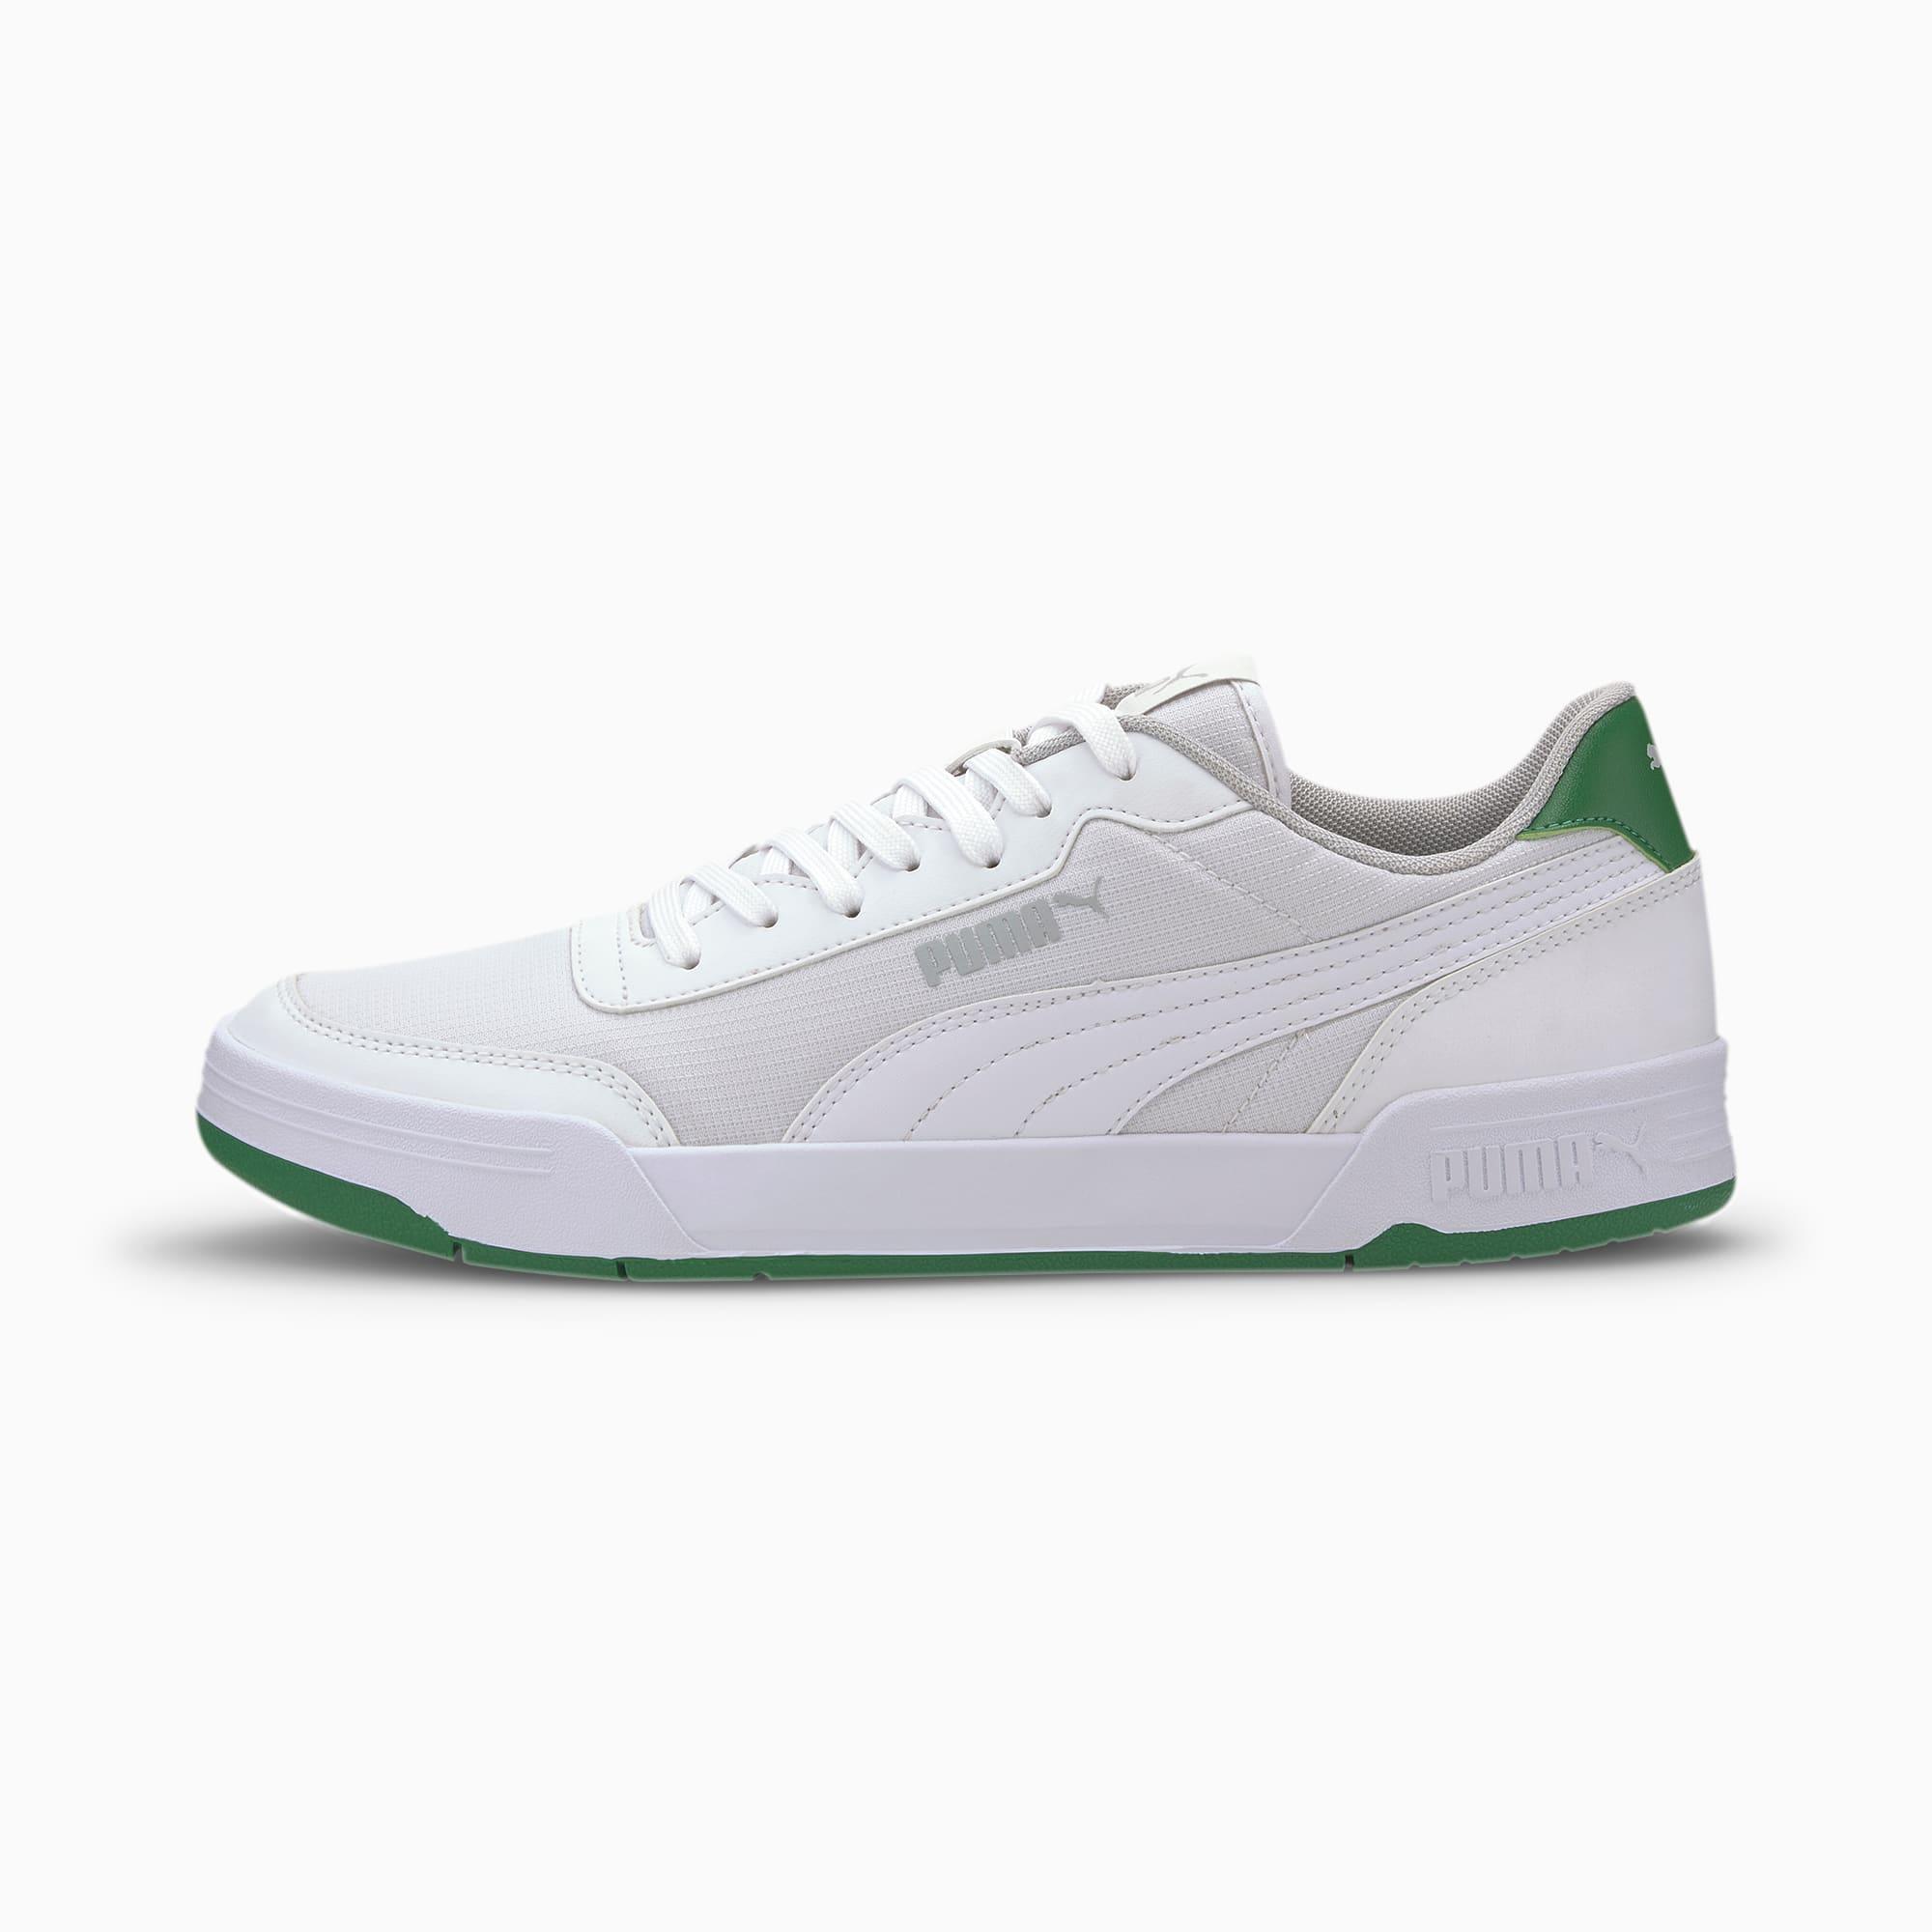 PUMA Synthetic Caracal Style Sneakers in White for Men - Lyst